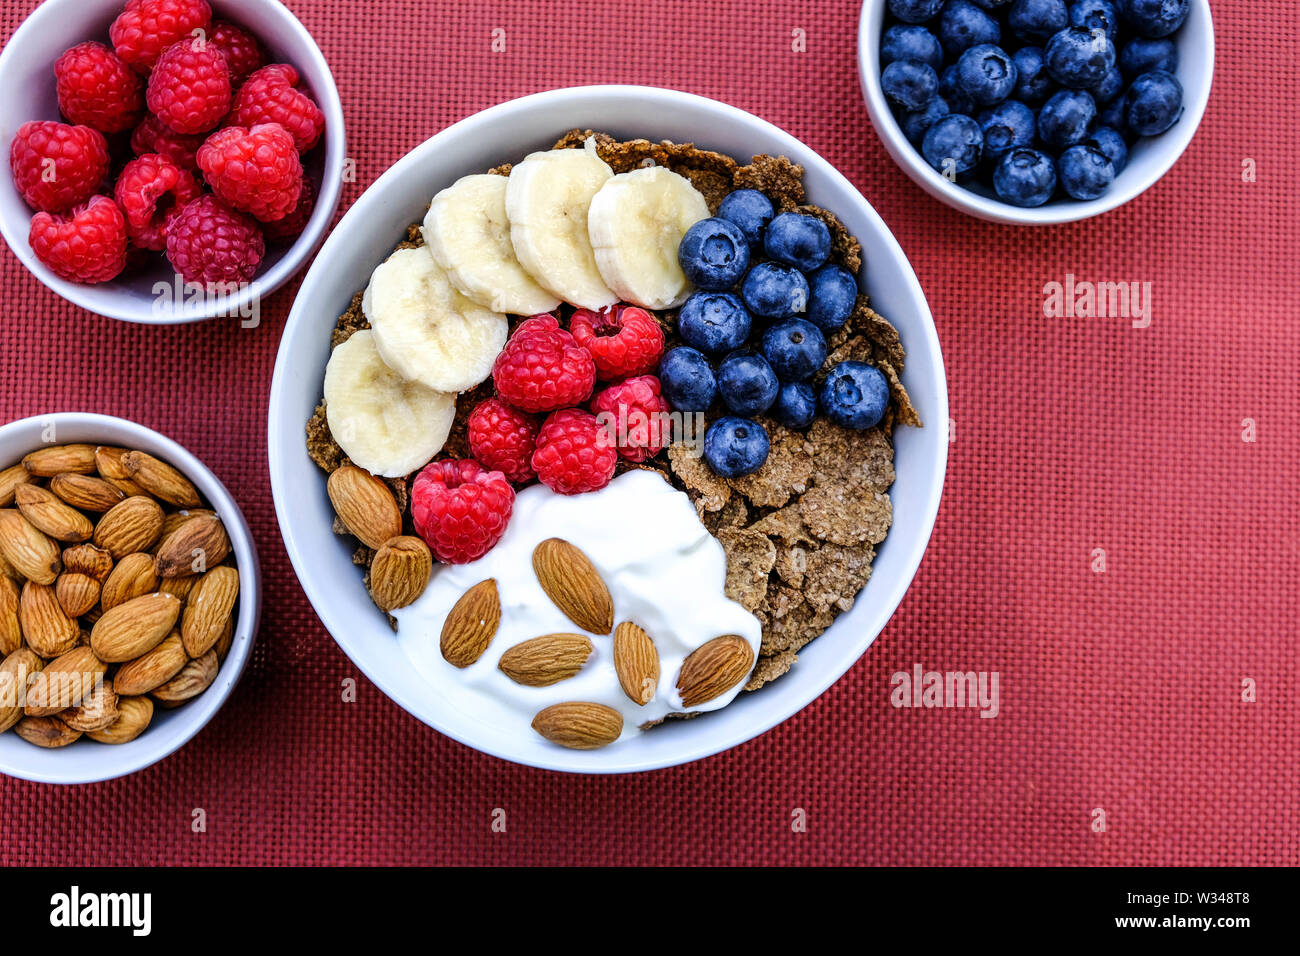 Health Breakfast Bowl of Cereals Fresh Fruit and Nuts With Yogurt in White Bowls Stock Photo